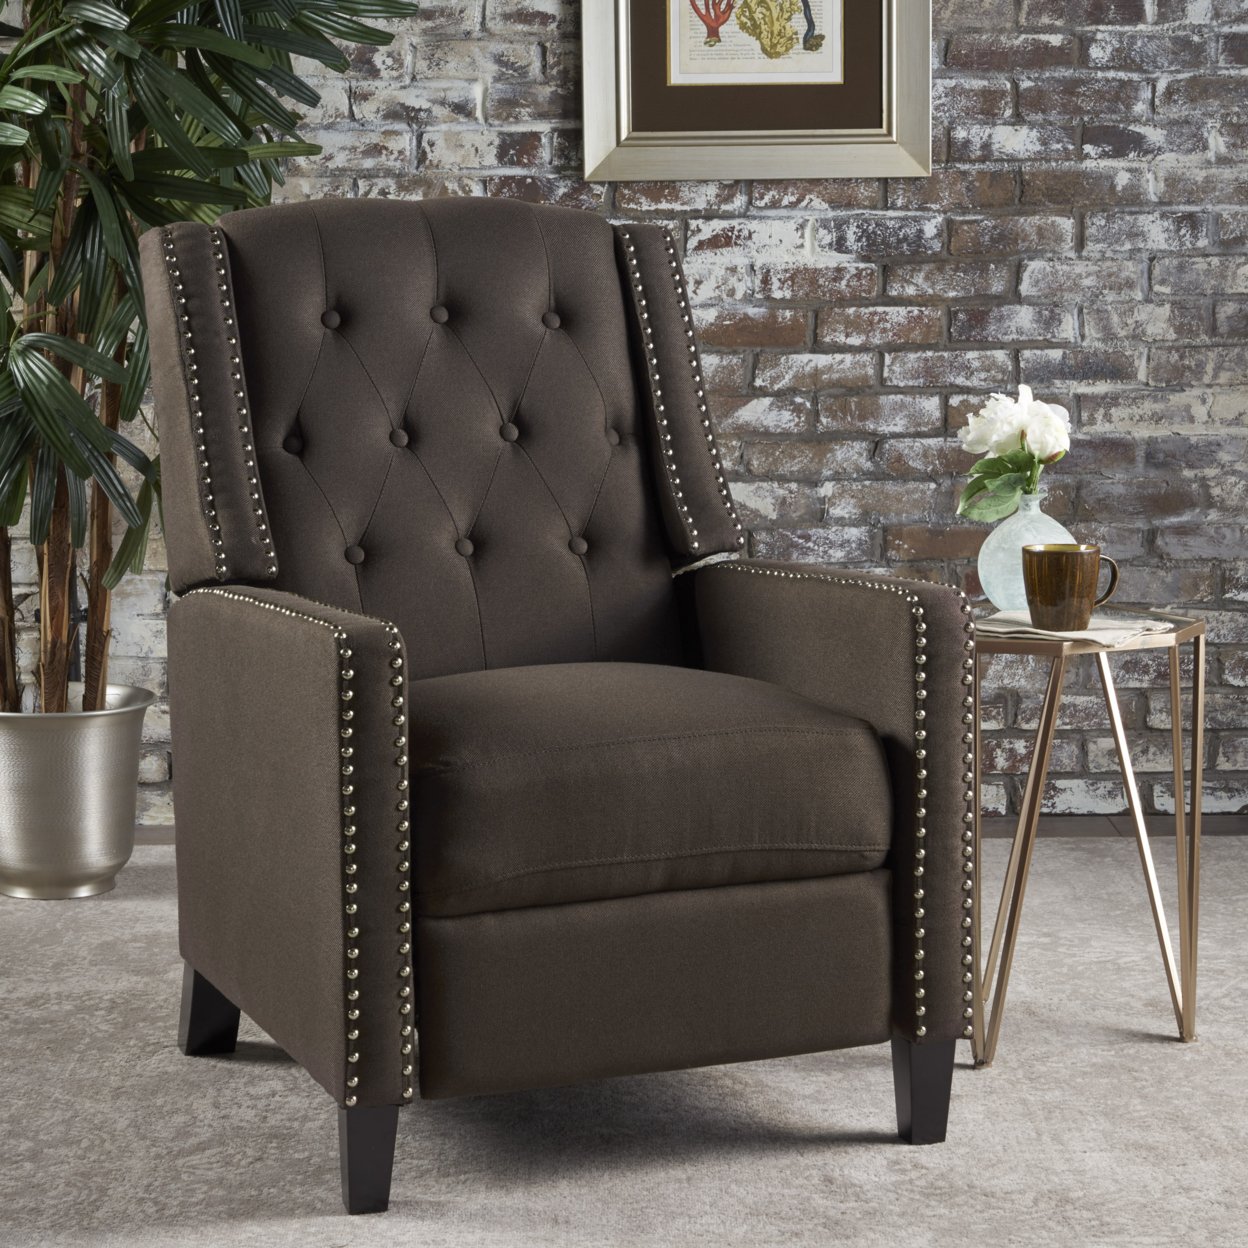 Ingrid Tufted Back Fabric Recliner Chair - Coffee